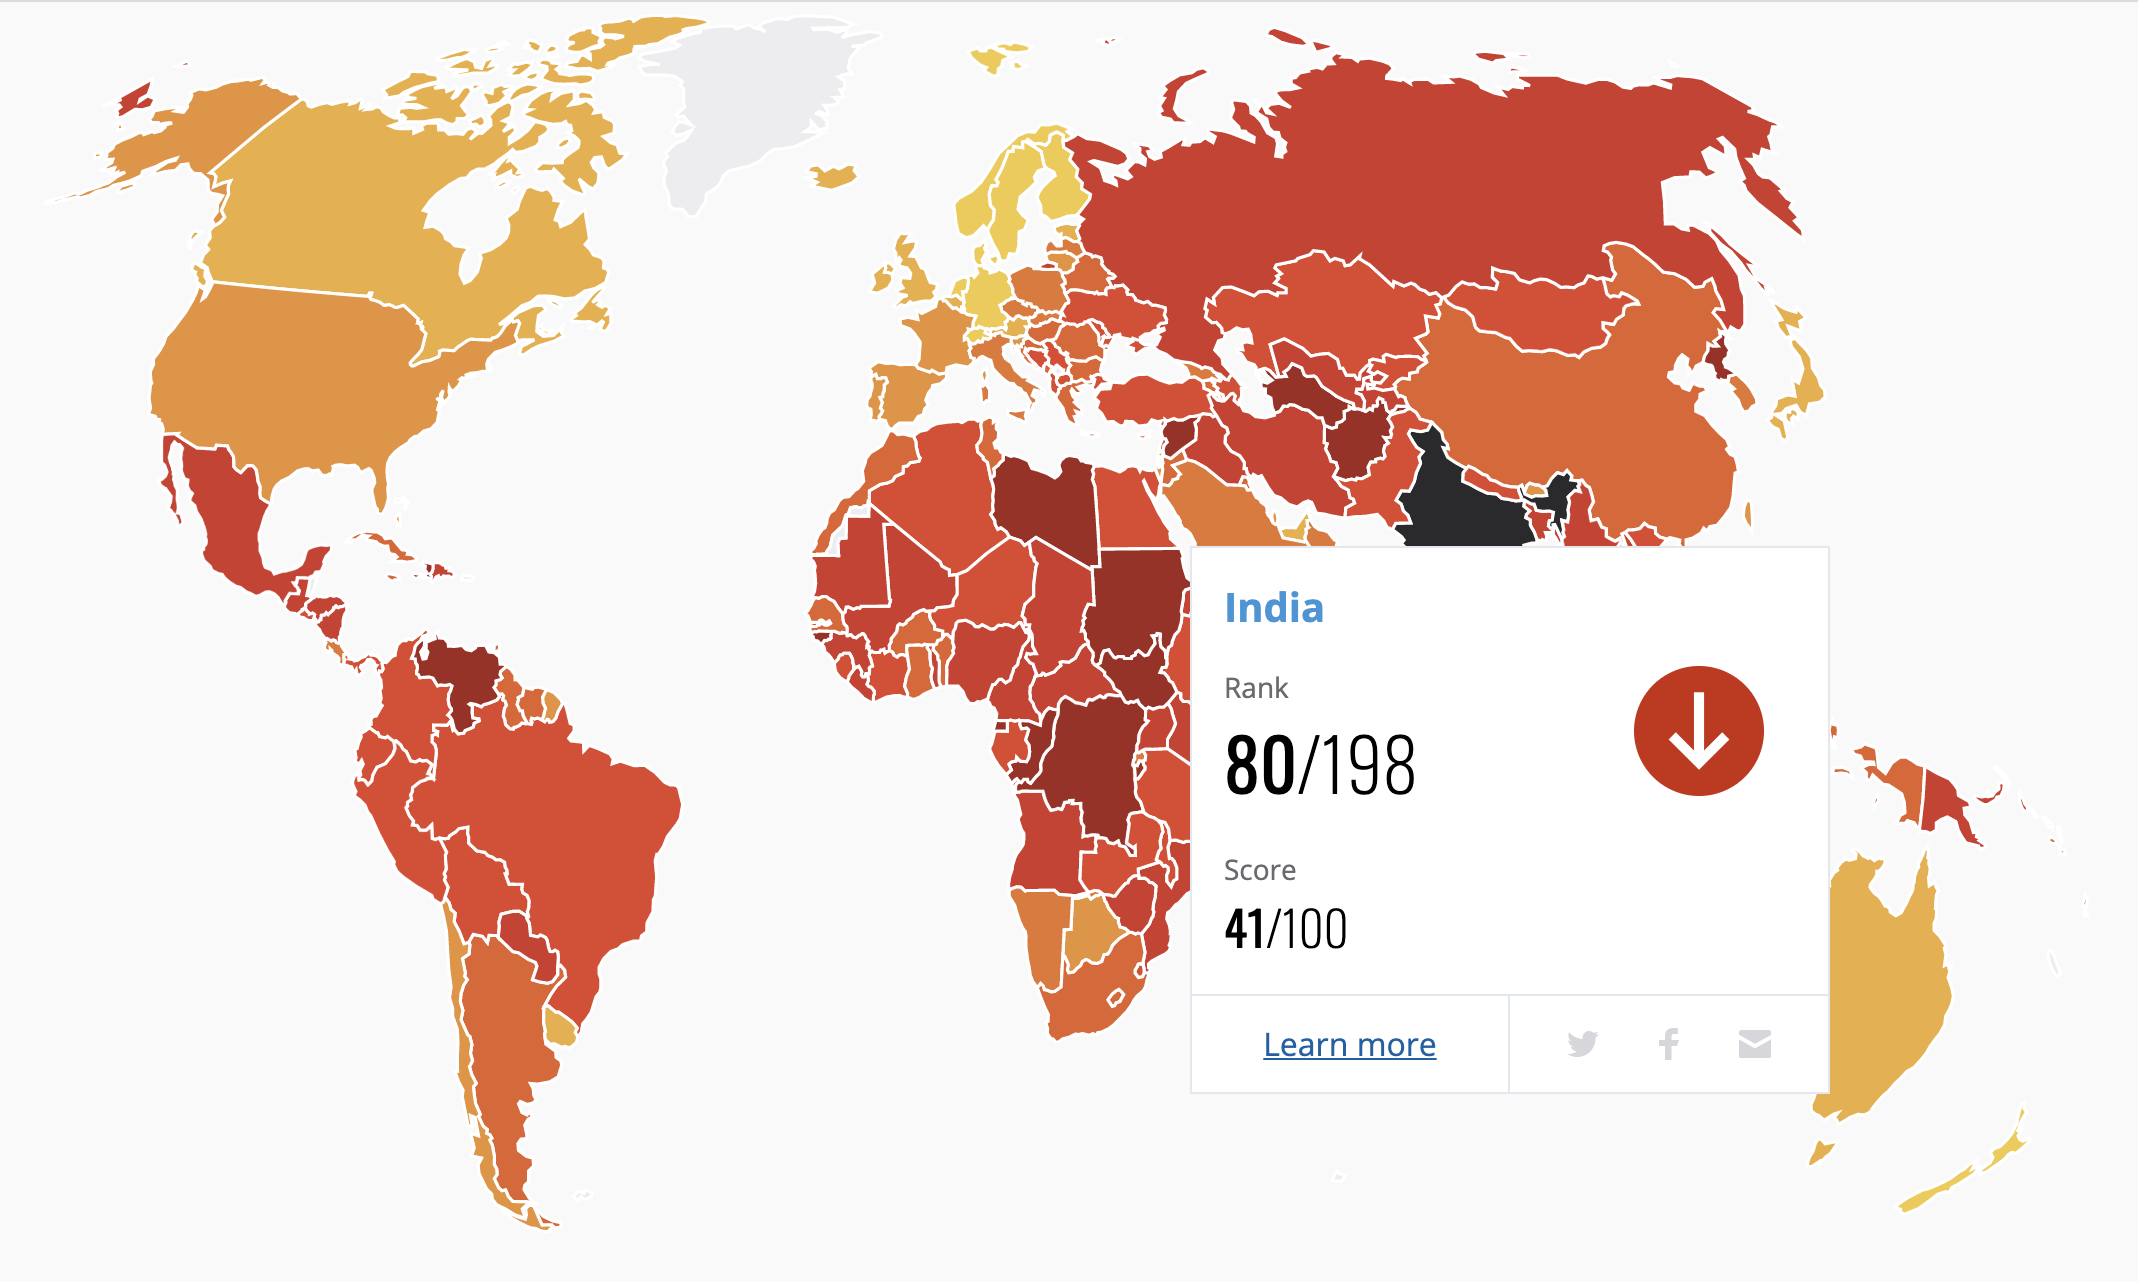 Every year, Transparency International ranks 176 countries worldwide on corruption. India is ranked 80.